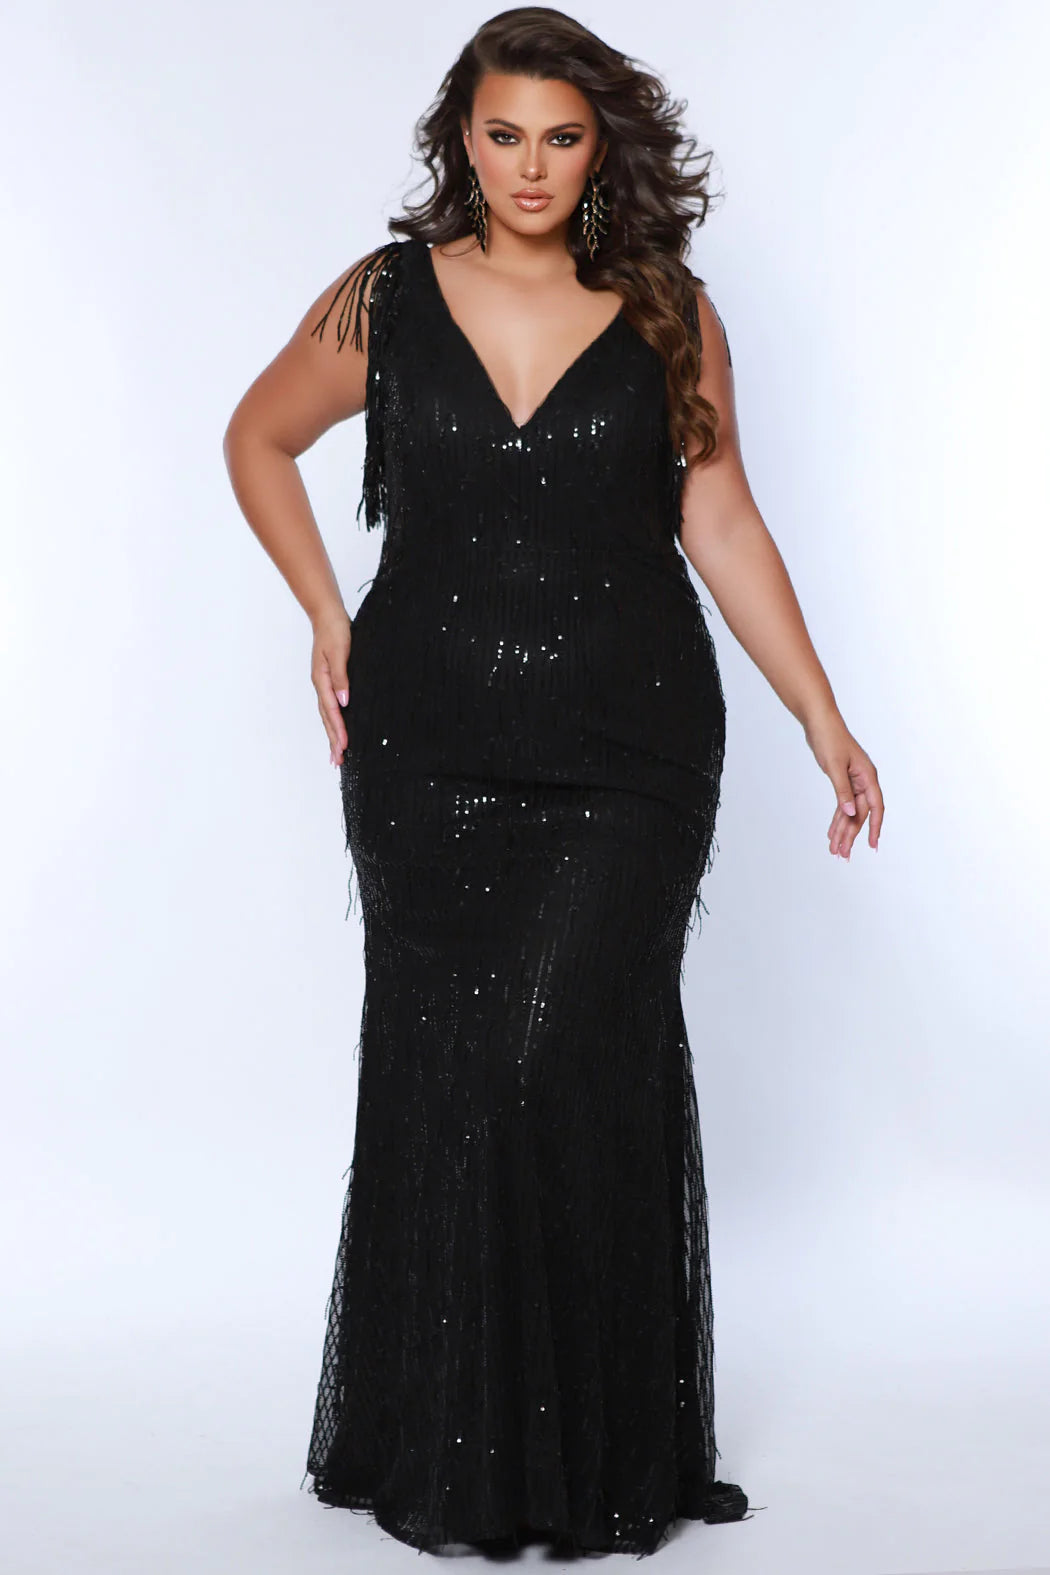 Enchanting sequin fringe cascades down the bodice of this plus size pageant dress. Its fitted silhouette and flattering V neckline provide an eye-catching look that is sure to turn heads. Perfect for your next formal event! Look glamourous at your next big fancy event when you arrive wearing our Spur of the Moment plus size fringe evening gown. Classic sequin slim formal dress updated with trendy fringe embellishment on the fitted bodice and fitted skirt for a very playful embellishment. 